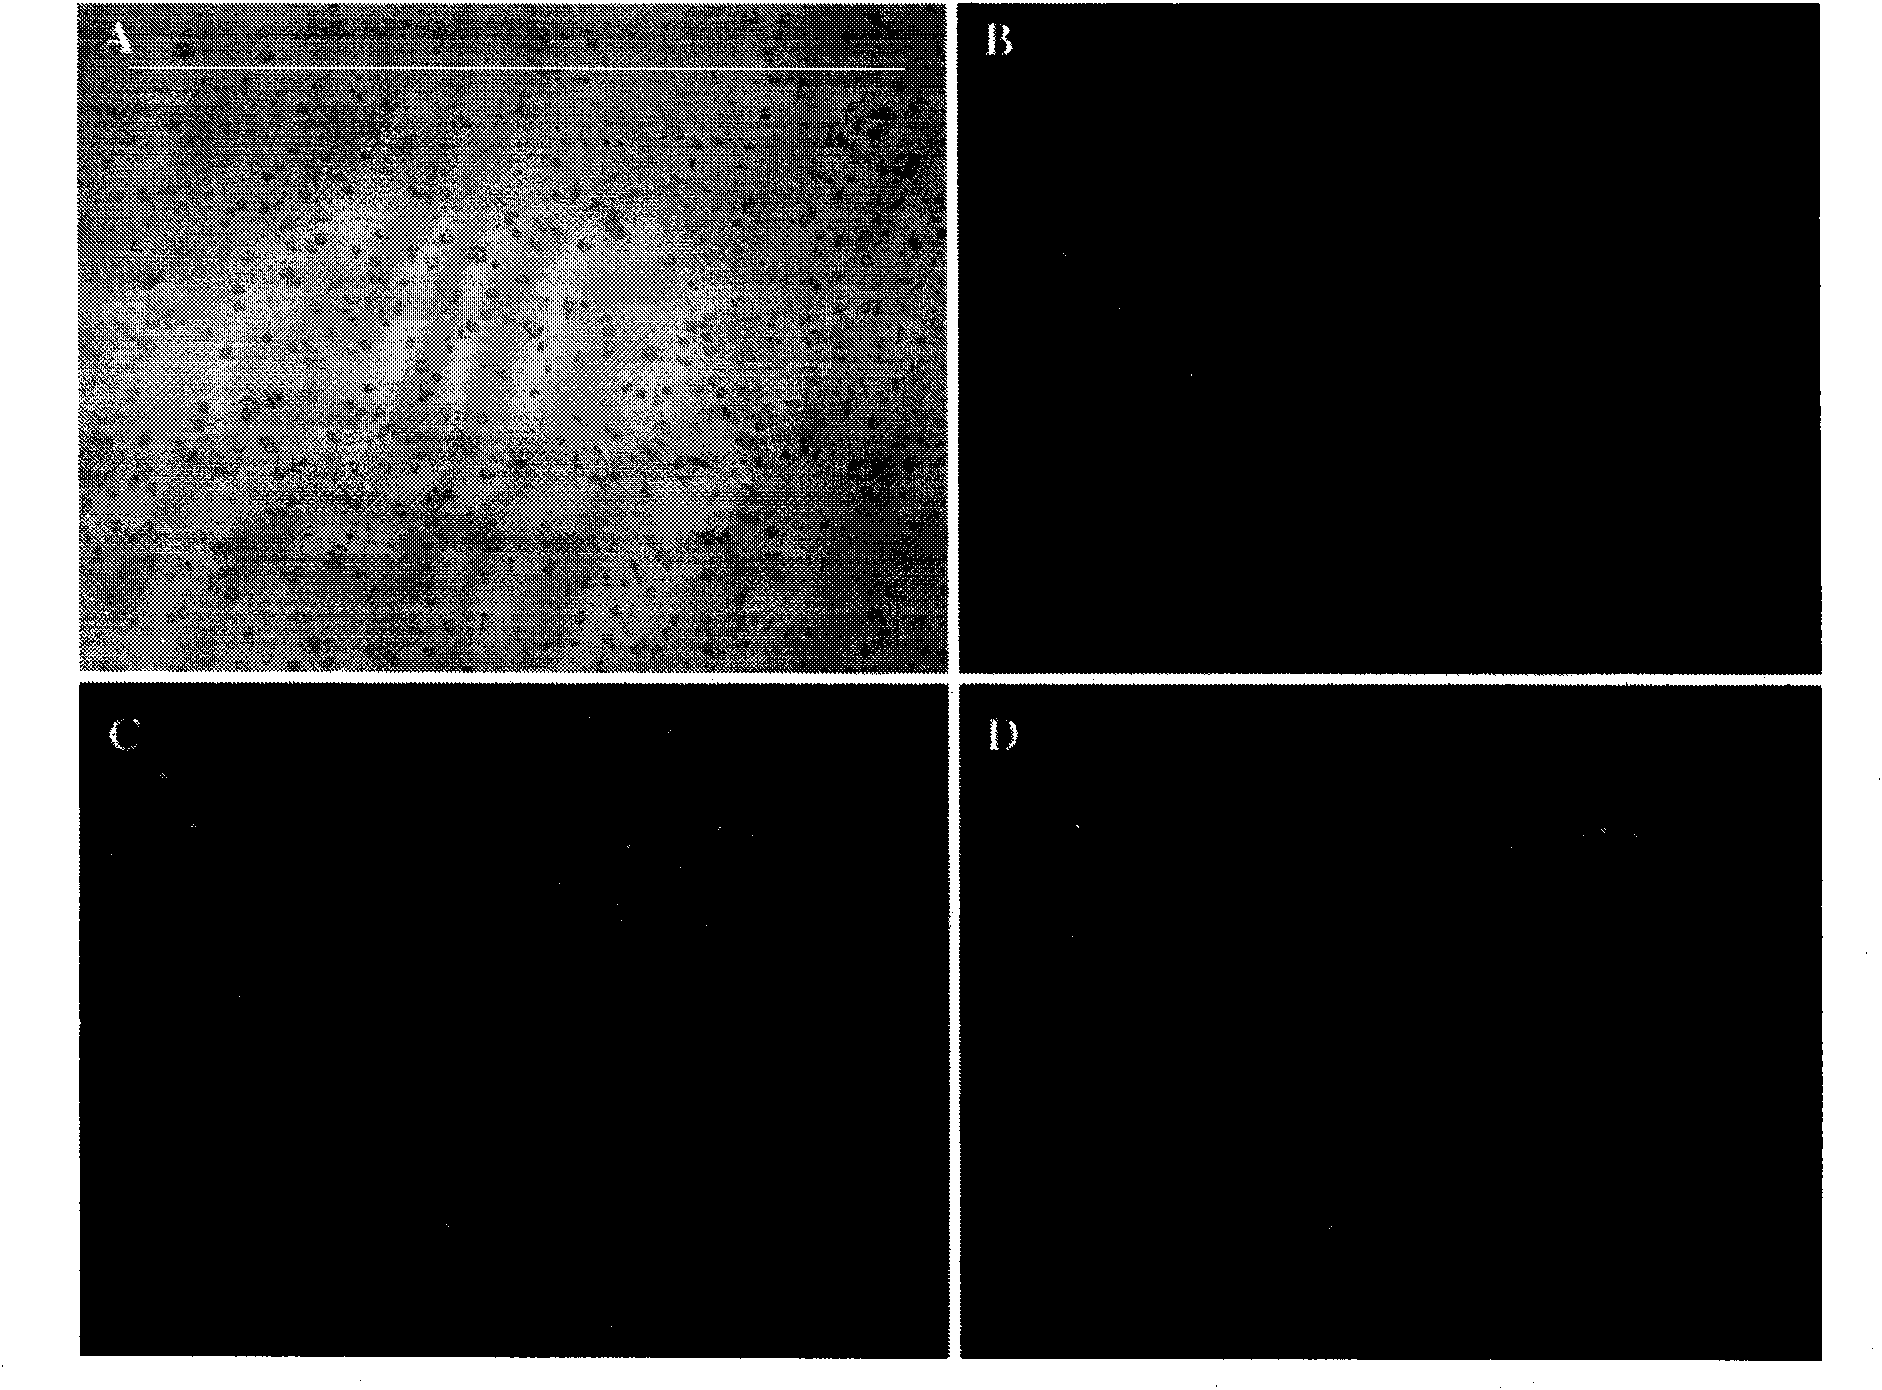 Method for enriching and extracting adult stem cells